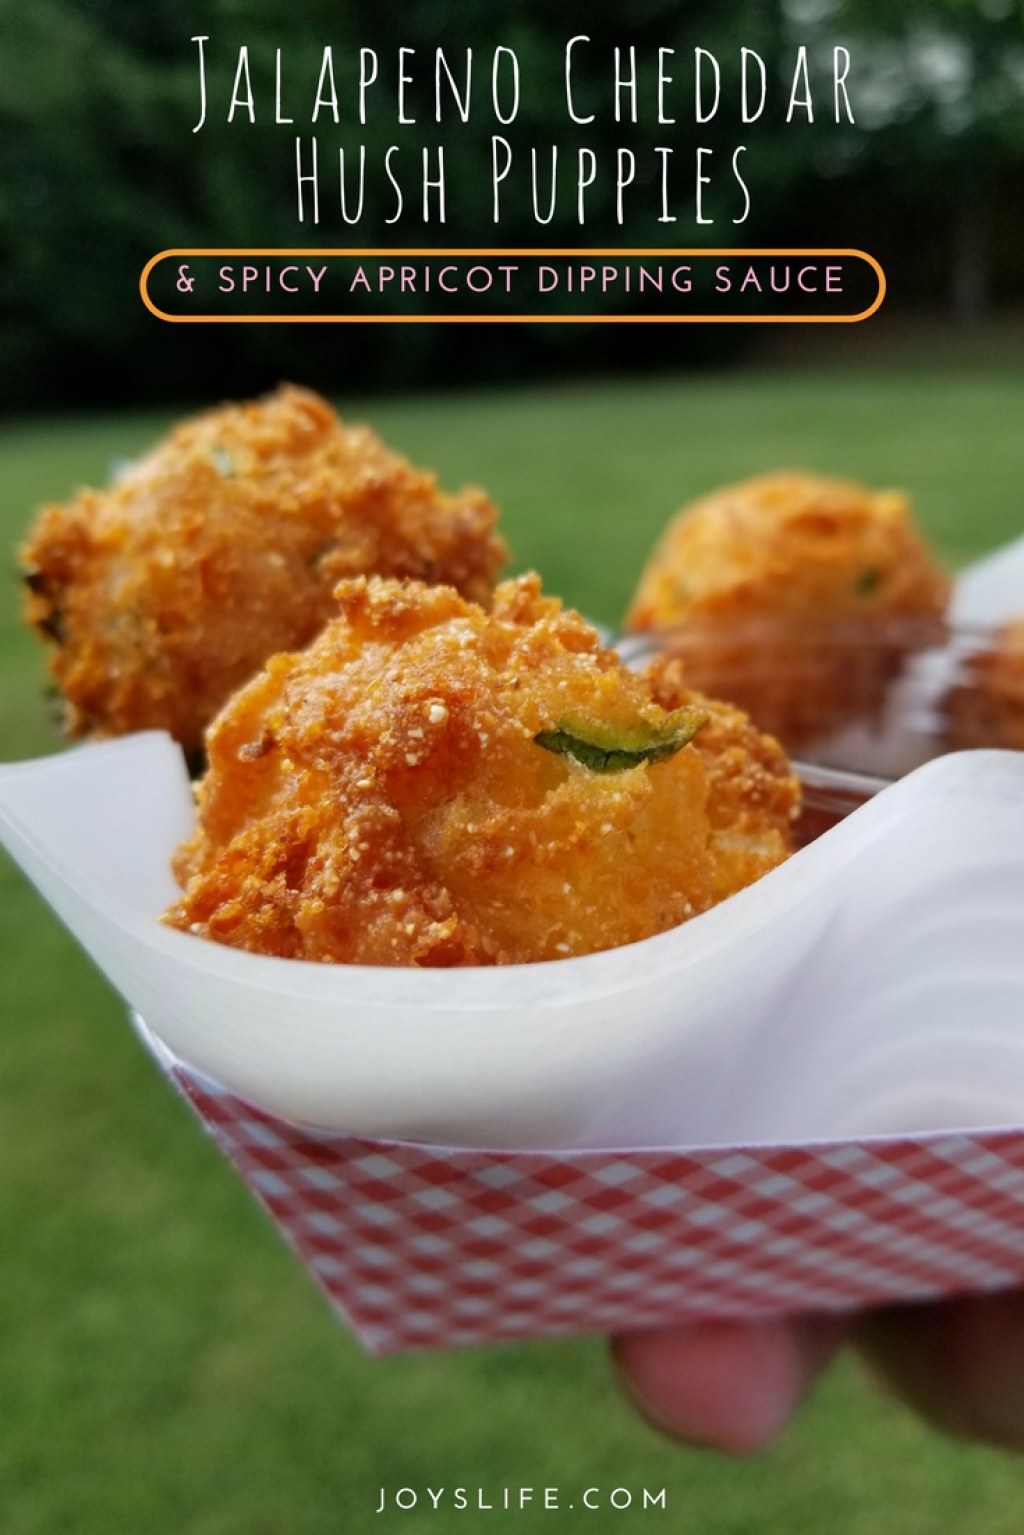 Picture of: Jalapeno Cheddar Hush Puppies & Spicy Apricot Dipping Sauce